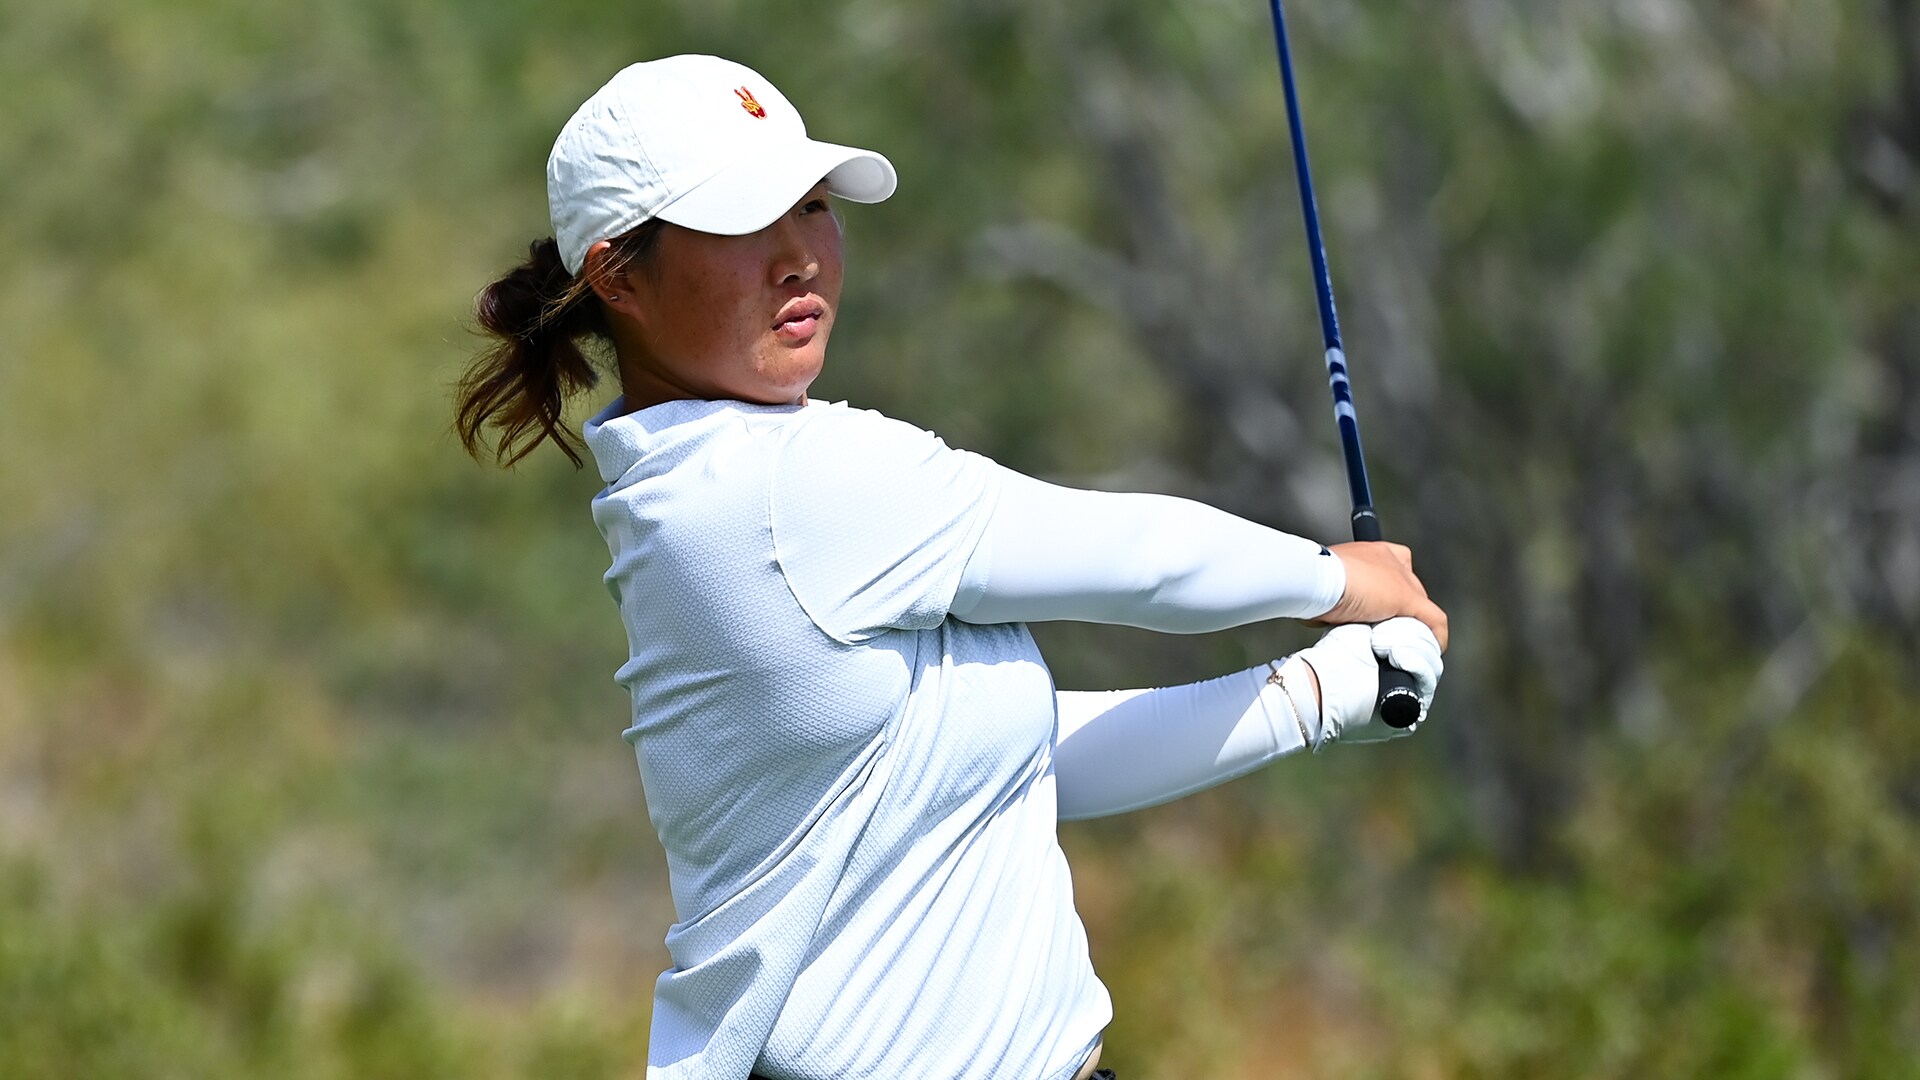 For Rose Zhang to win NCAAs again, she’ll have to catch her childhood pal